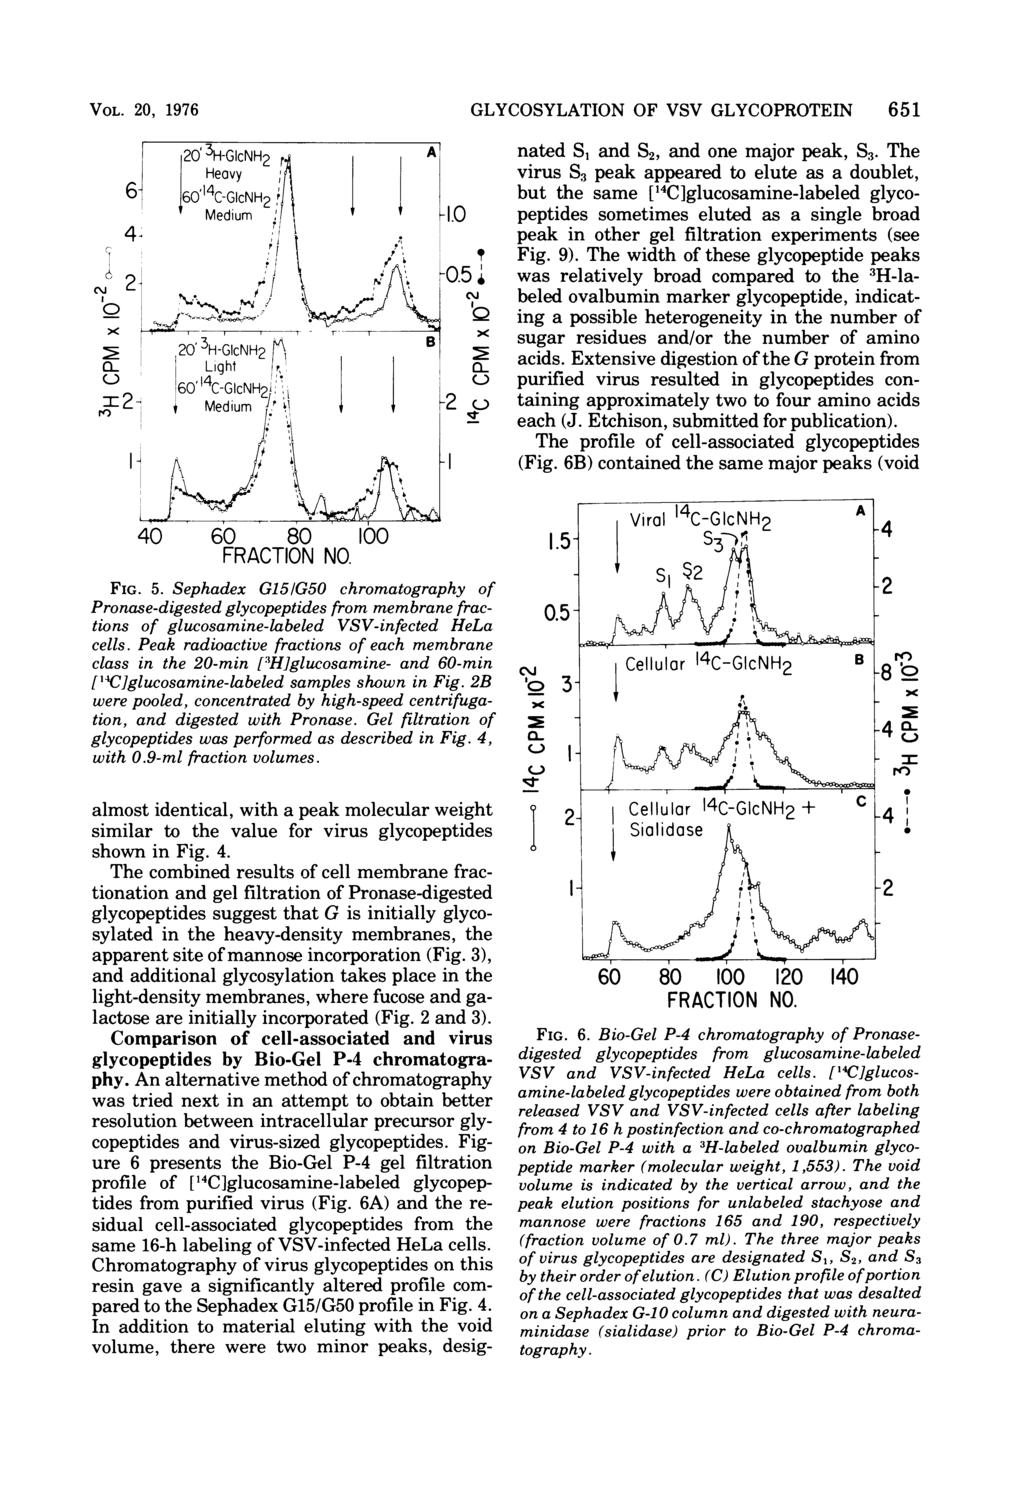 VOL. 20, 1976 60 80 FIG. 5. Sephadex G151G50 chromatography of Pronase-digested glycopeptides from membrane fractions of glucosamine-labeled VSV-infected HeLa cells.